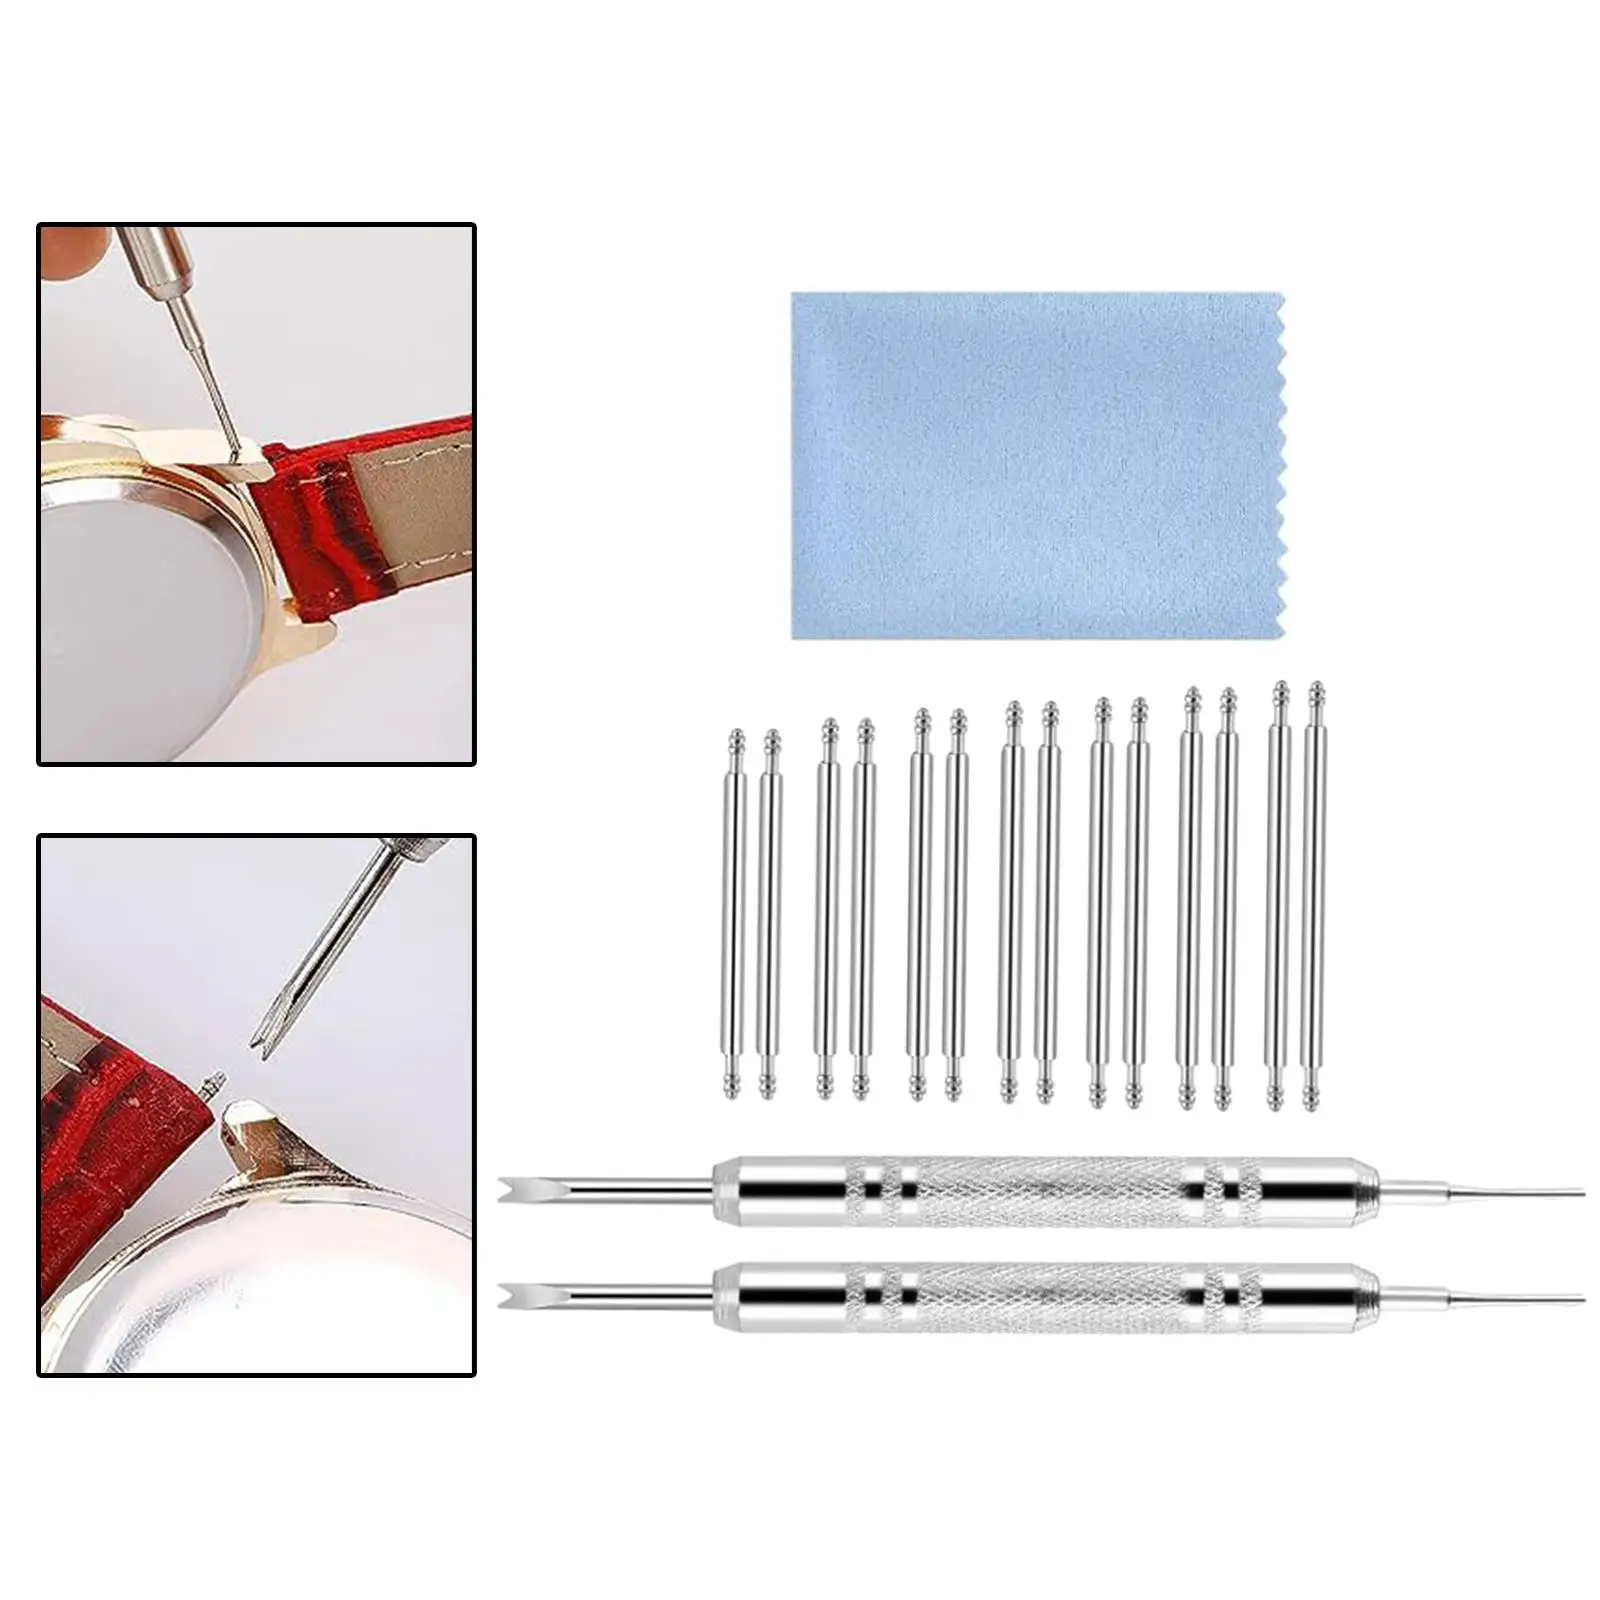 Watch Link Remover Kit Repair Tool Adjustment Fixing Watch Repair Kit Watch Band Pins for Watch Accessories Watch Band Removal